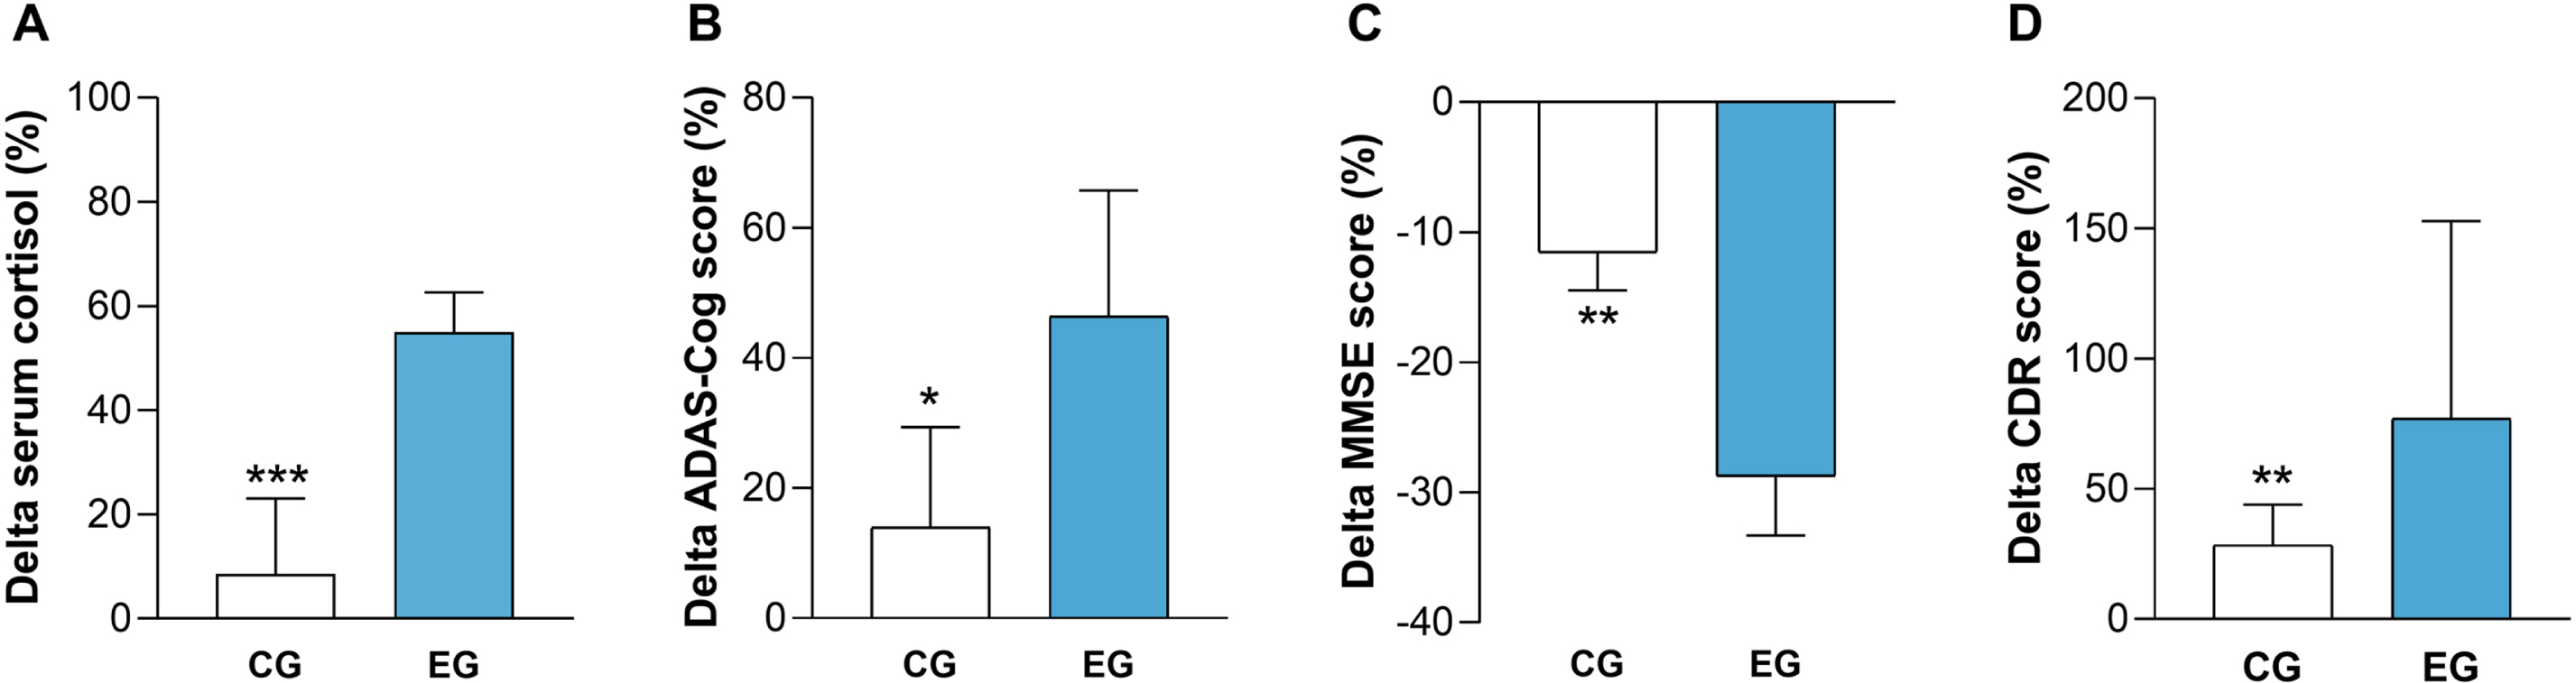 After 24 months, EG showed an increase in serum cortisol level and a greatest cognitive decline compared to CG. Percent change versus baseline of serum cortisol level was significantly higher in EG to CG (A). Percent change versus baseline of ADAS-Cog scores was significantly higher in EG compared to CG (B). Percent change versus baseline of MMSE values was significantly lower in EG compared to CG (C). Percent change versus baseline of CDR values was significantly higher in EG compared to CG (D). CG, control group; EG, experimental group; ADAS-Cog, Alzheimer’s Disease Assessment Scale-Cognitive; MMSE, Mini-Mental State Examination; CDR, Clinical Dementia Rate. *p < 0.05, ***p < 0.001.